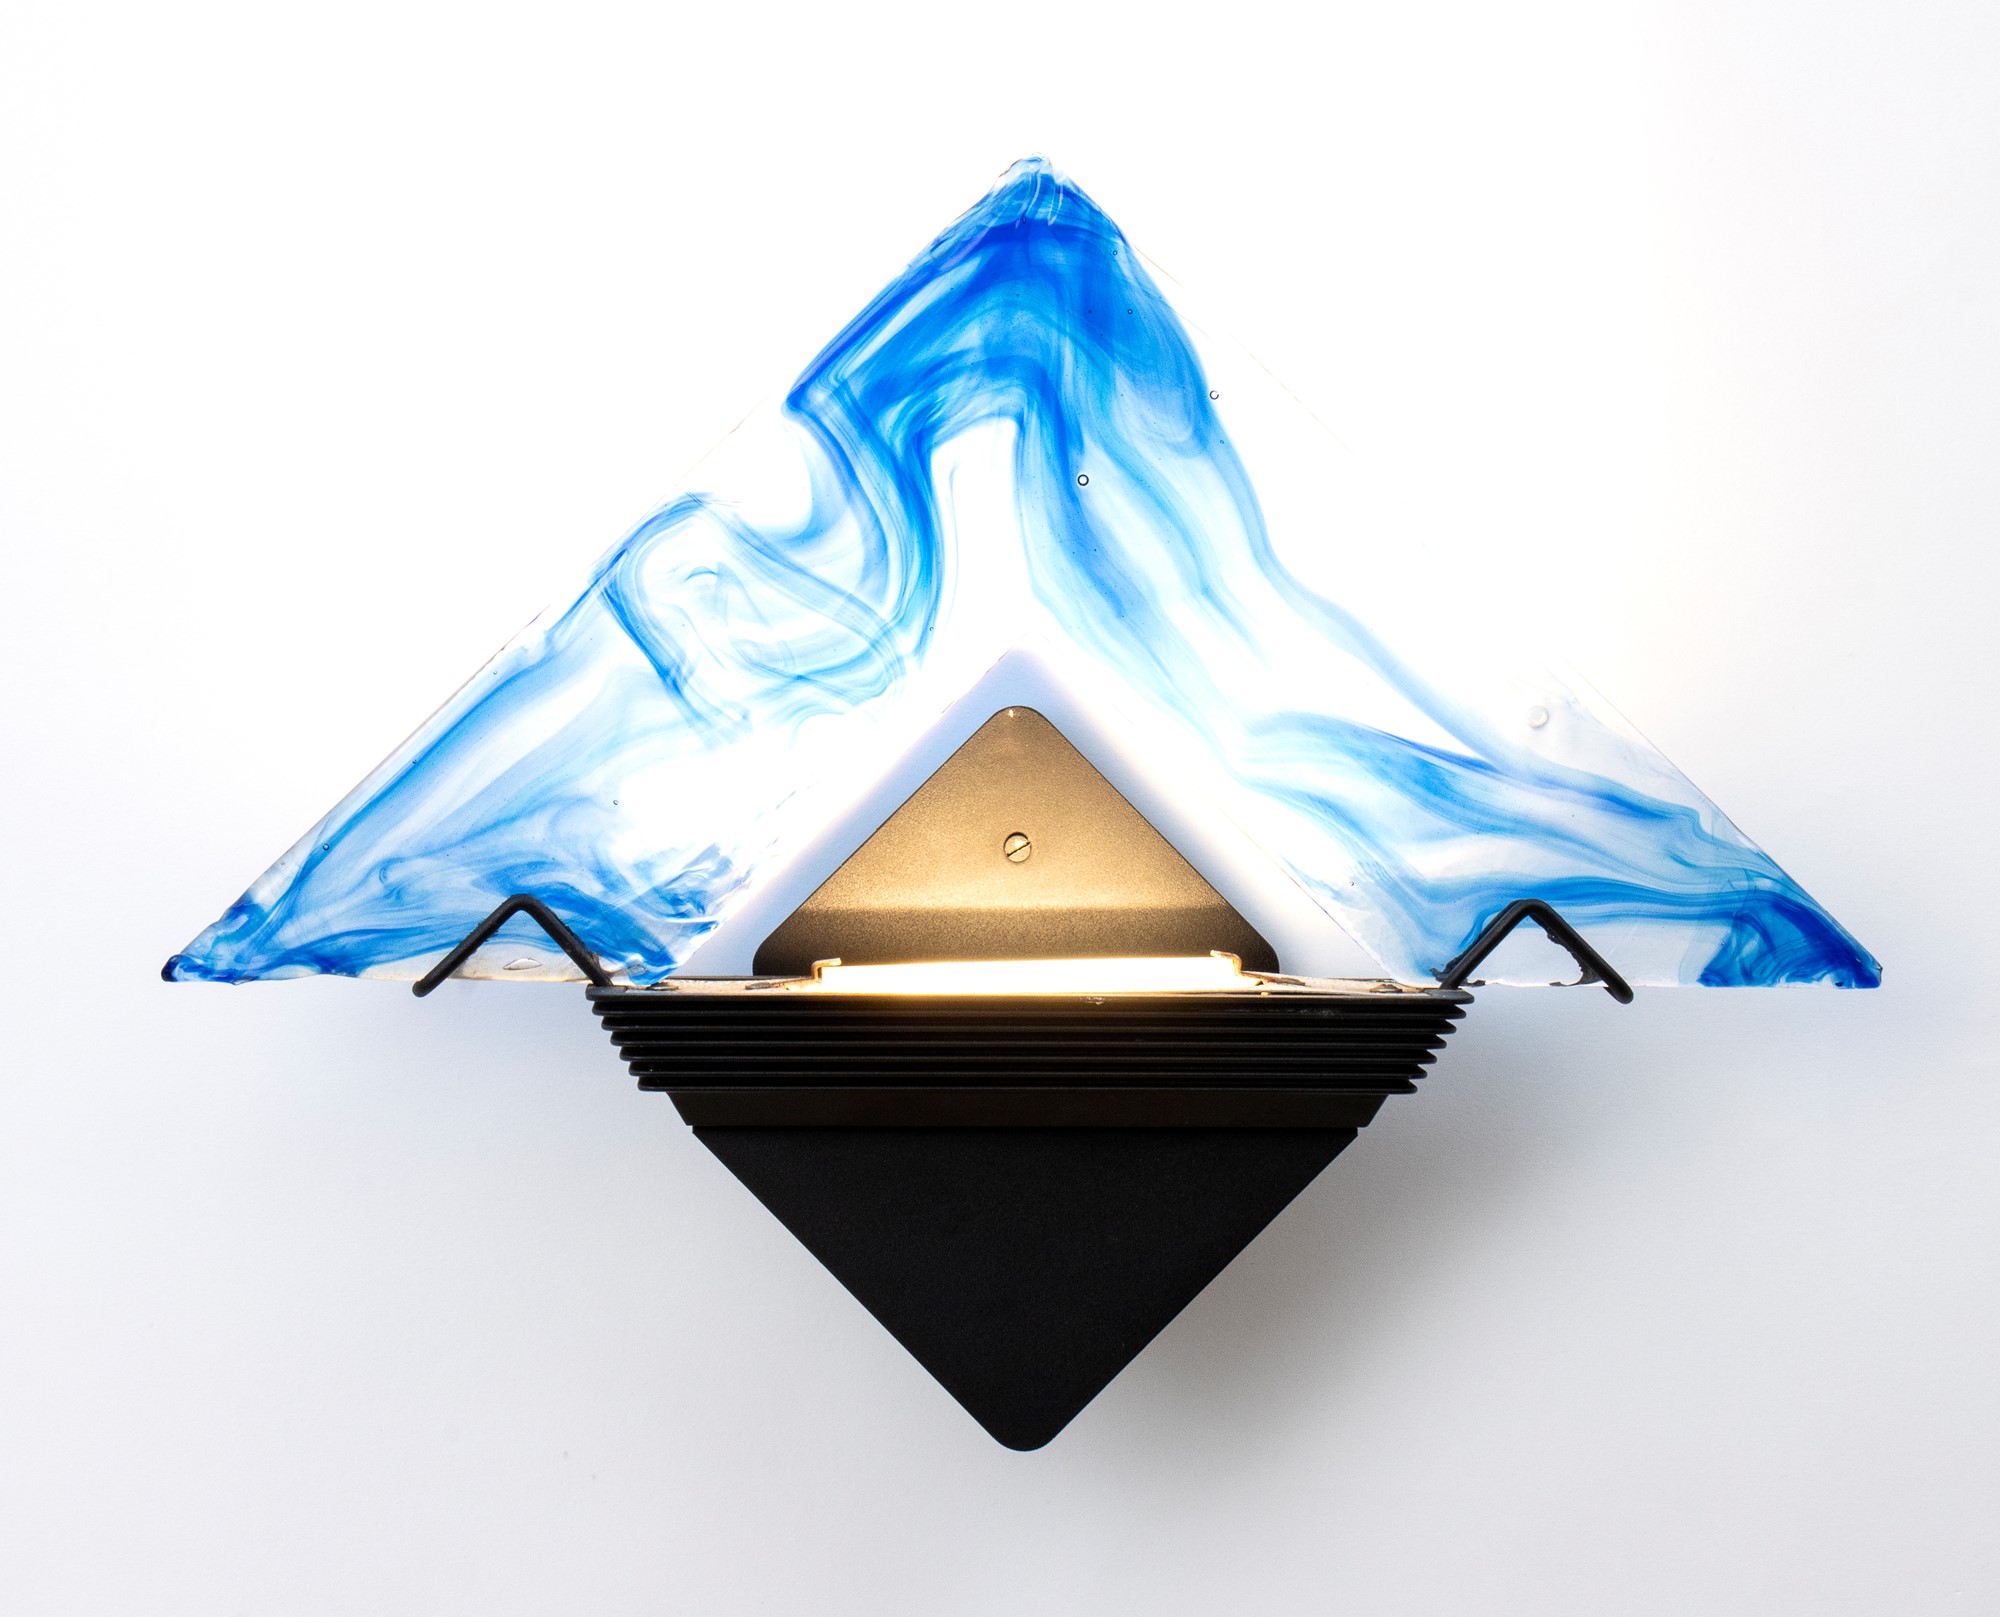 La Murrina wing lamp in hand blown Murano glass mounted on a triangular frame - Image 7 of 27